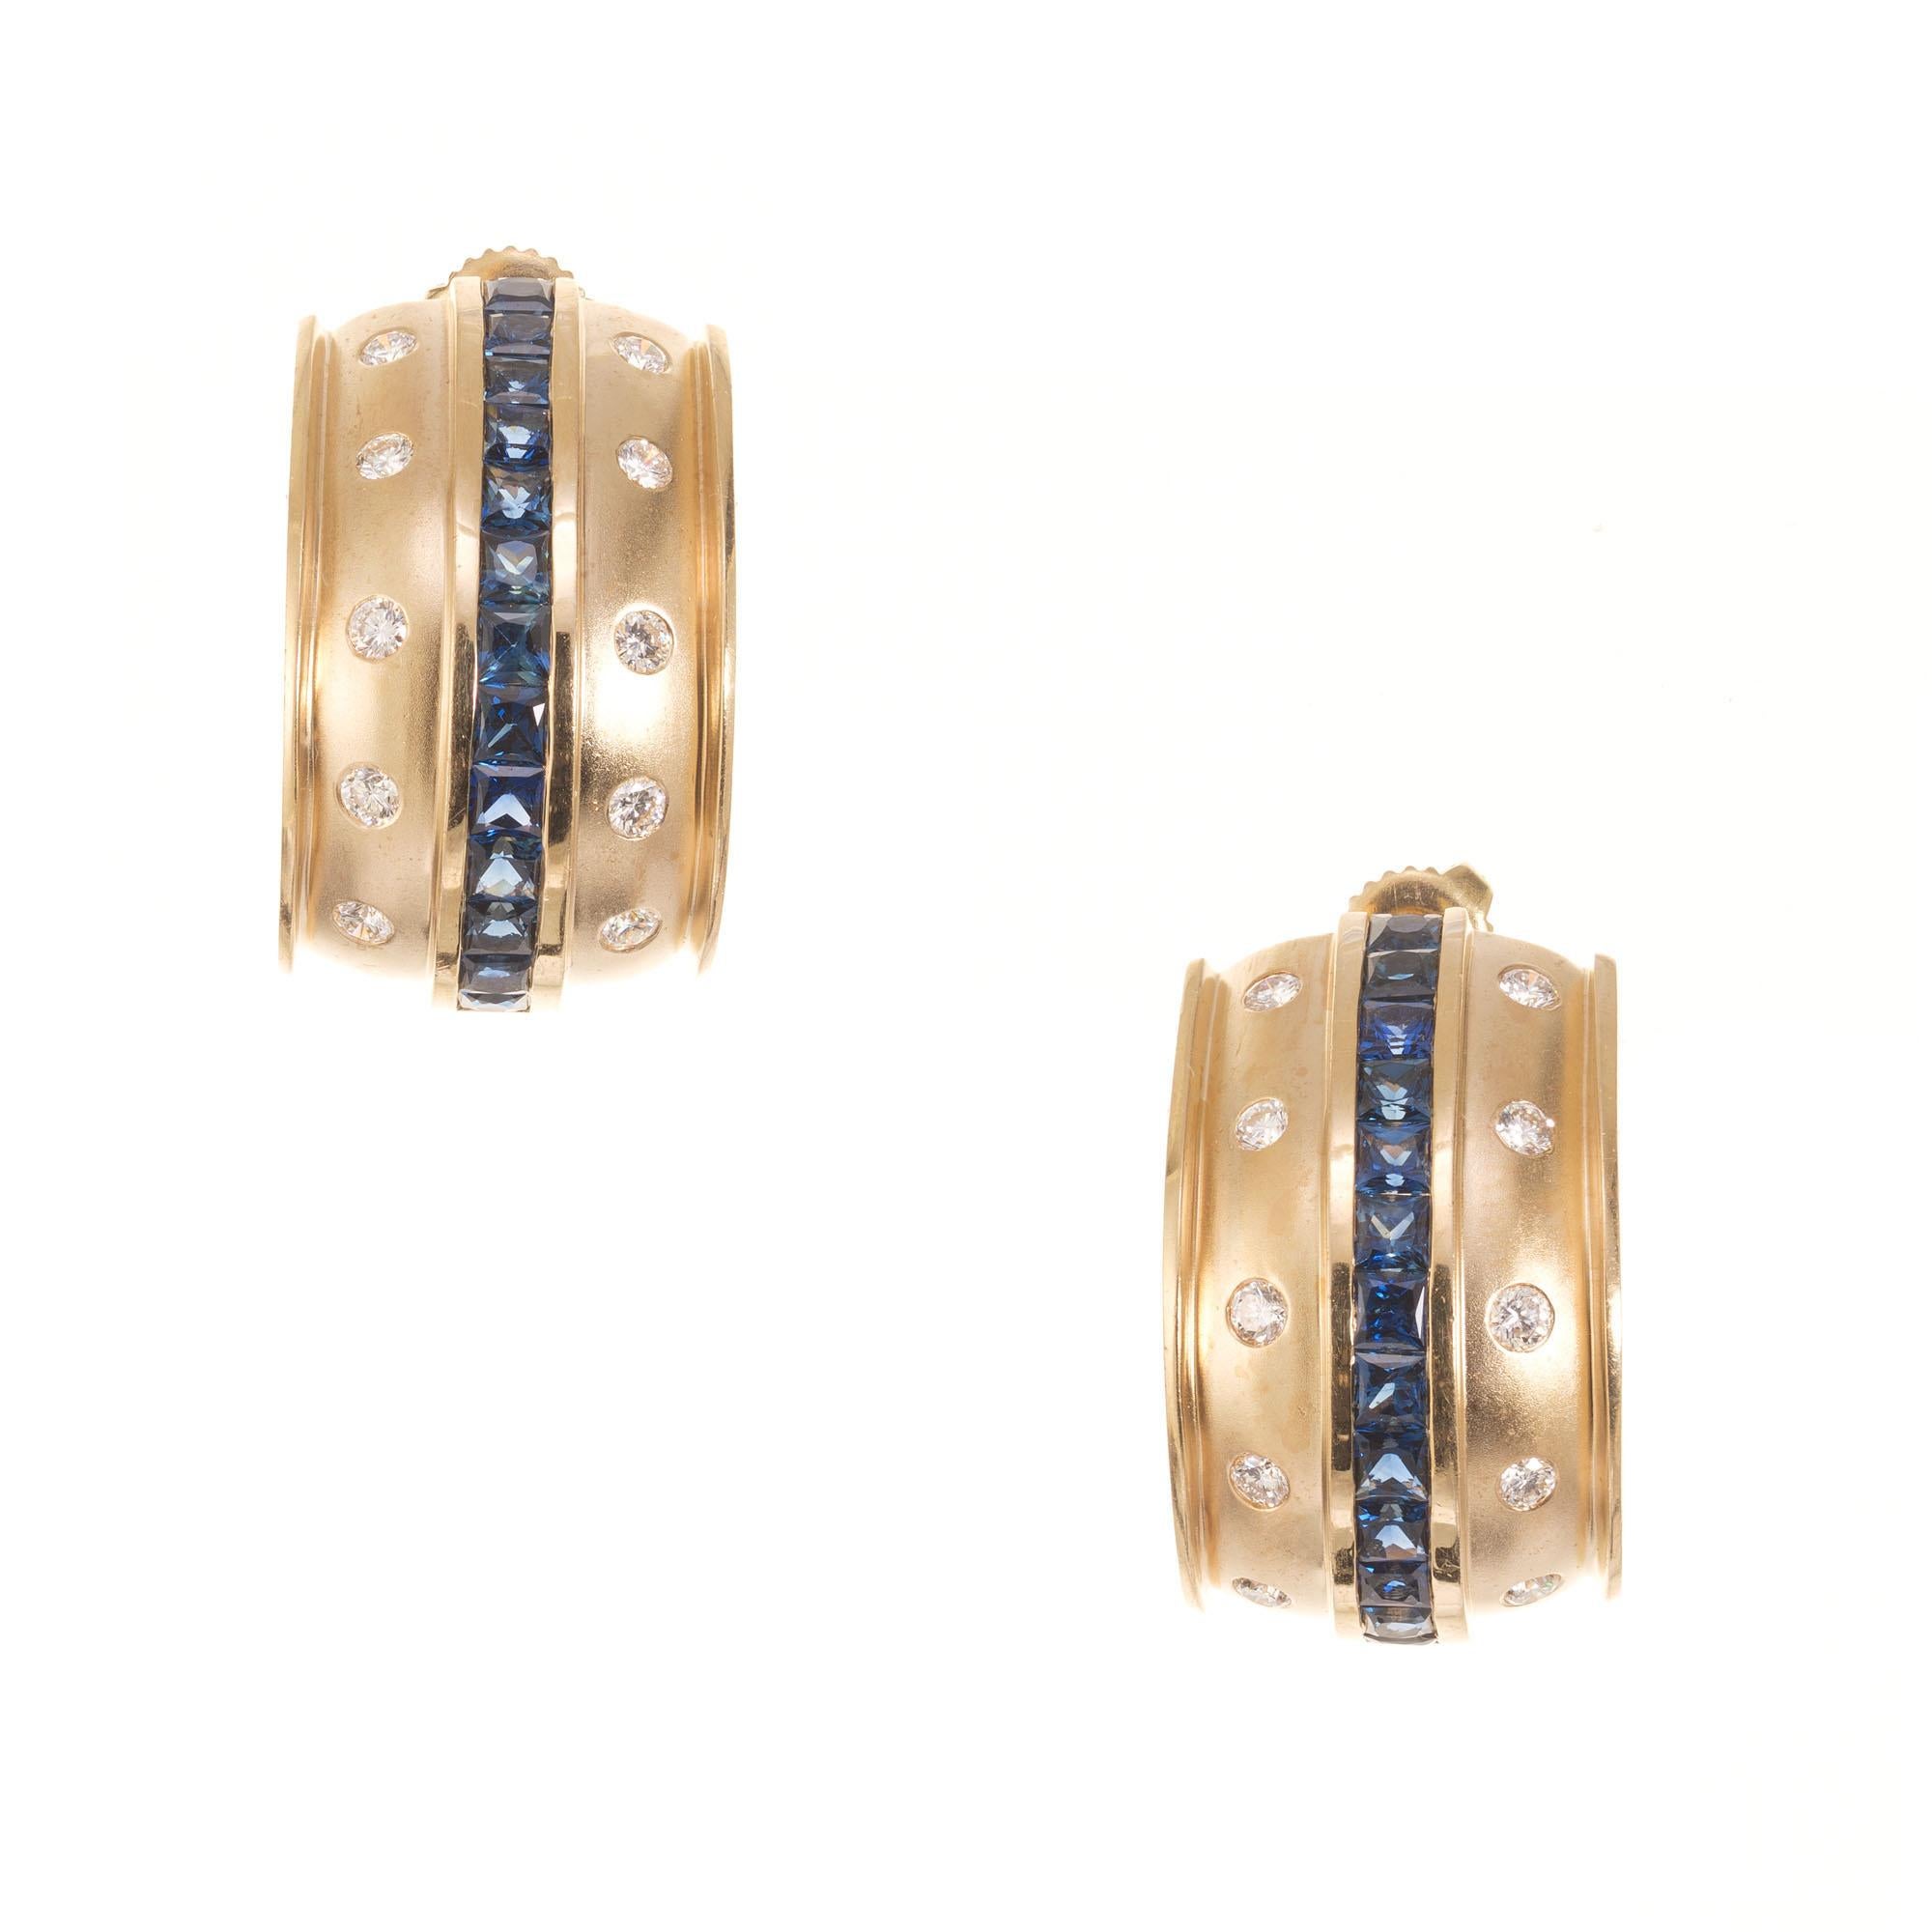 1970's Diamond and sapphire half hoop earrings. 26 square cut sapphires accented with 20 round cut diamonds set in 14k yellow gold.

20 round diamonds approx. total weight. 0.80cts.  H-I SI
26 square cut sapphires, approx. total weight. 3.00cts.